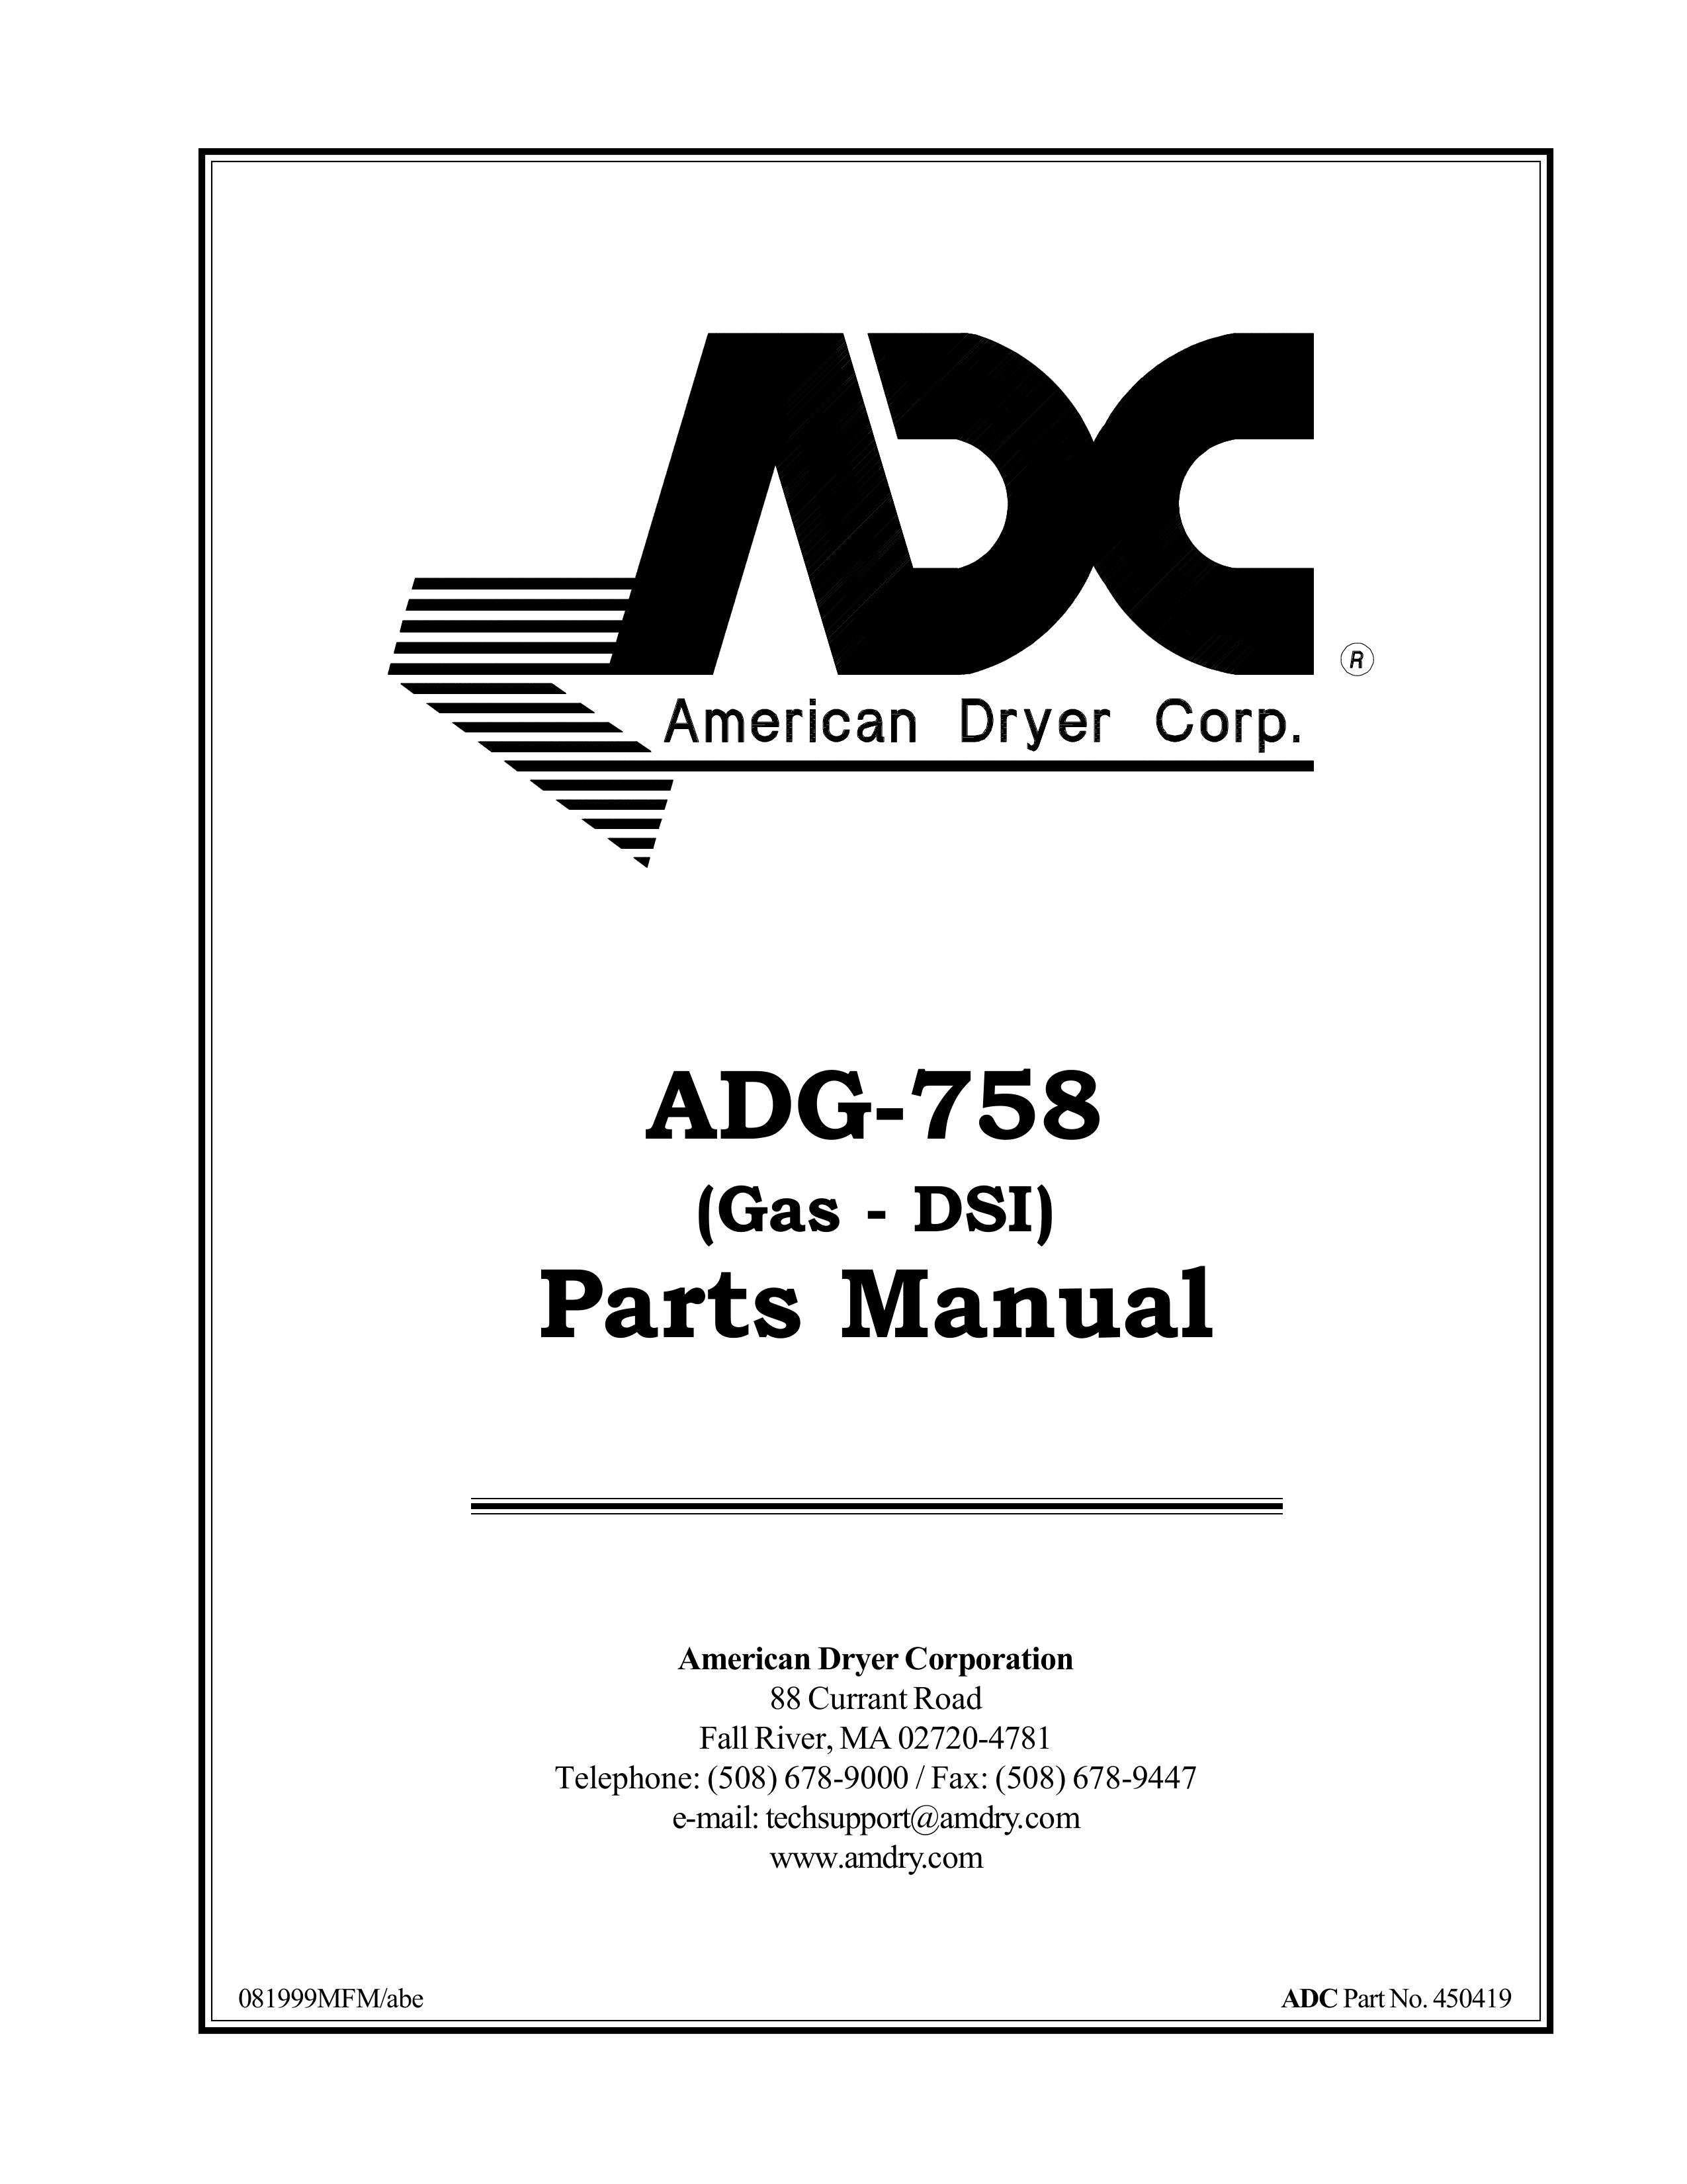 ADC ADG-758 Clothes Dryer User Manual